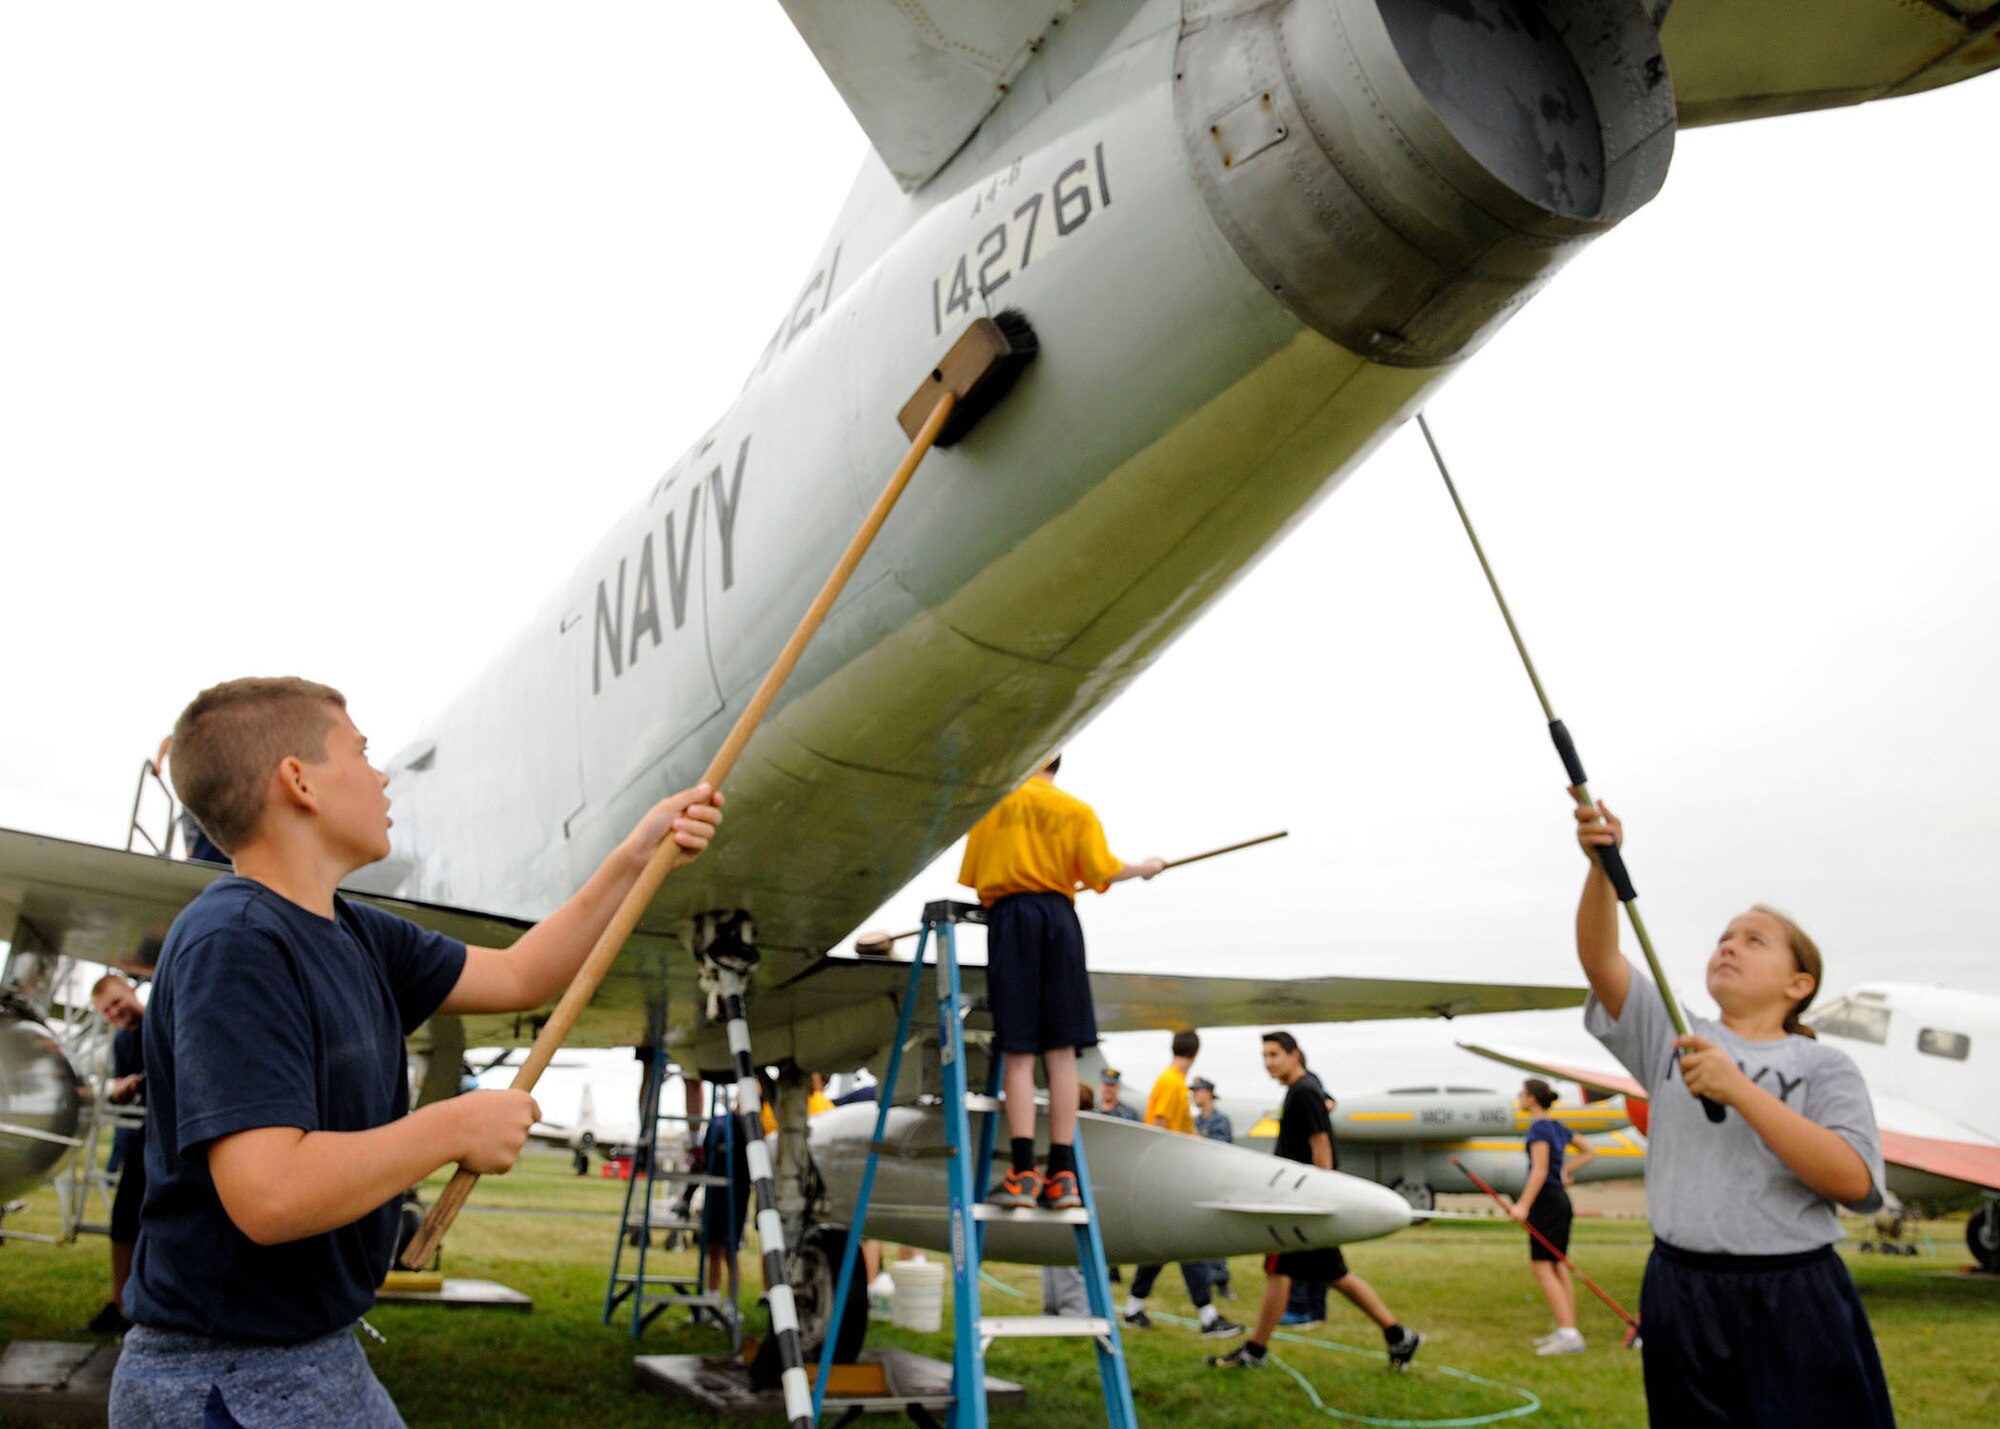 Sea Cadets from the Tomcat squadron, wash an A-4B Skyhawk at the Selfridge
Military Air Museum on Selfridge Air National Guard Base, Michigan, Sept.
27, 2015. The Tomcat squadron recently adopted the A-4B Skyhawk and helps
keep the aircraft in top shape. The Skyhawk is a single seat carrier-capable
attack aircraft developed for the United States Navy. The Skyhawk was
operated at Selfridge ANGB from 1969 to 1973. (U.S. Air National Guard photo
by Senior Airman Ryan Zeski/Released)
